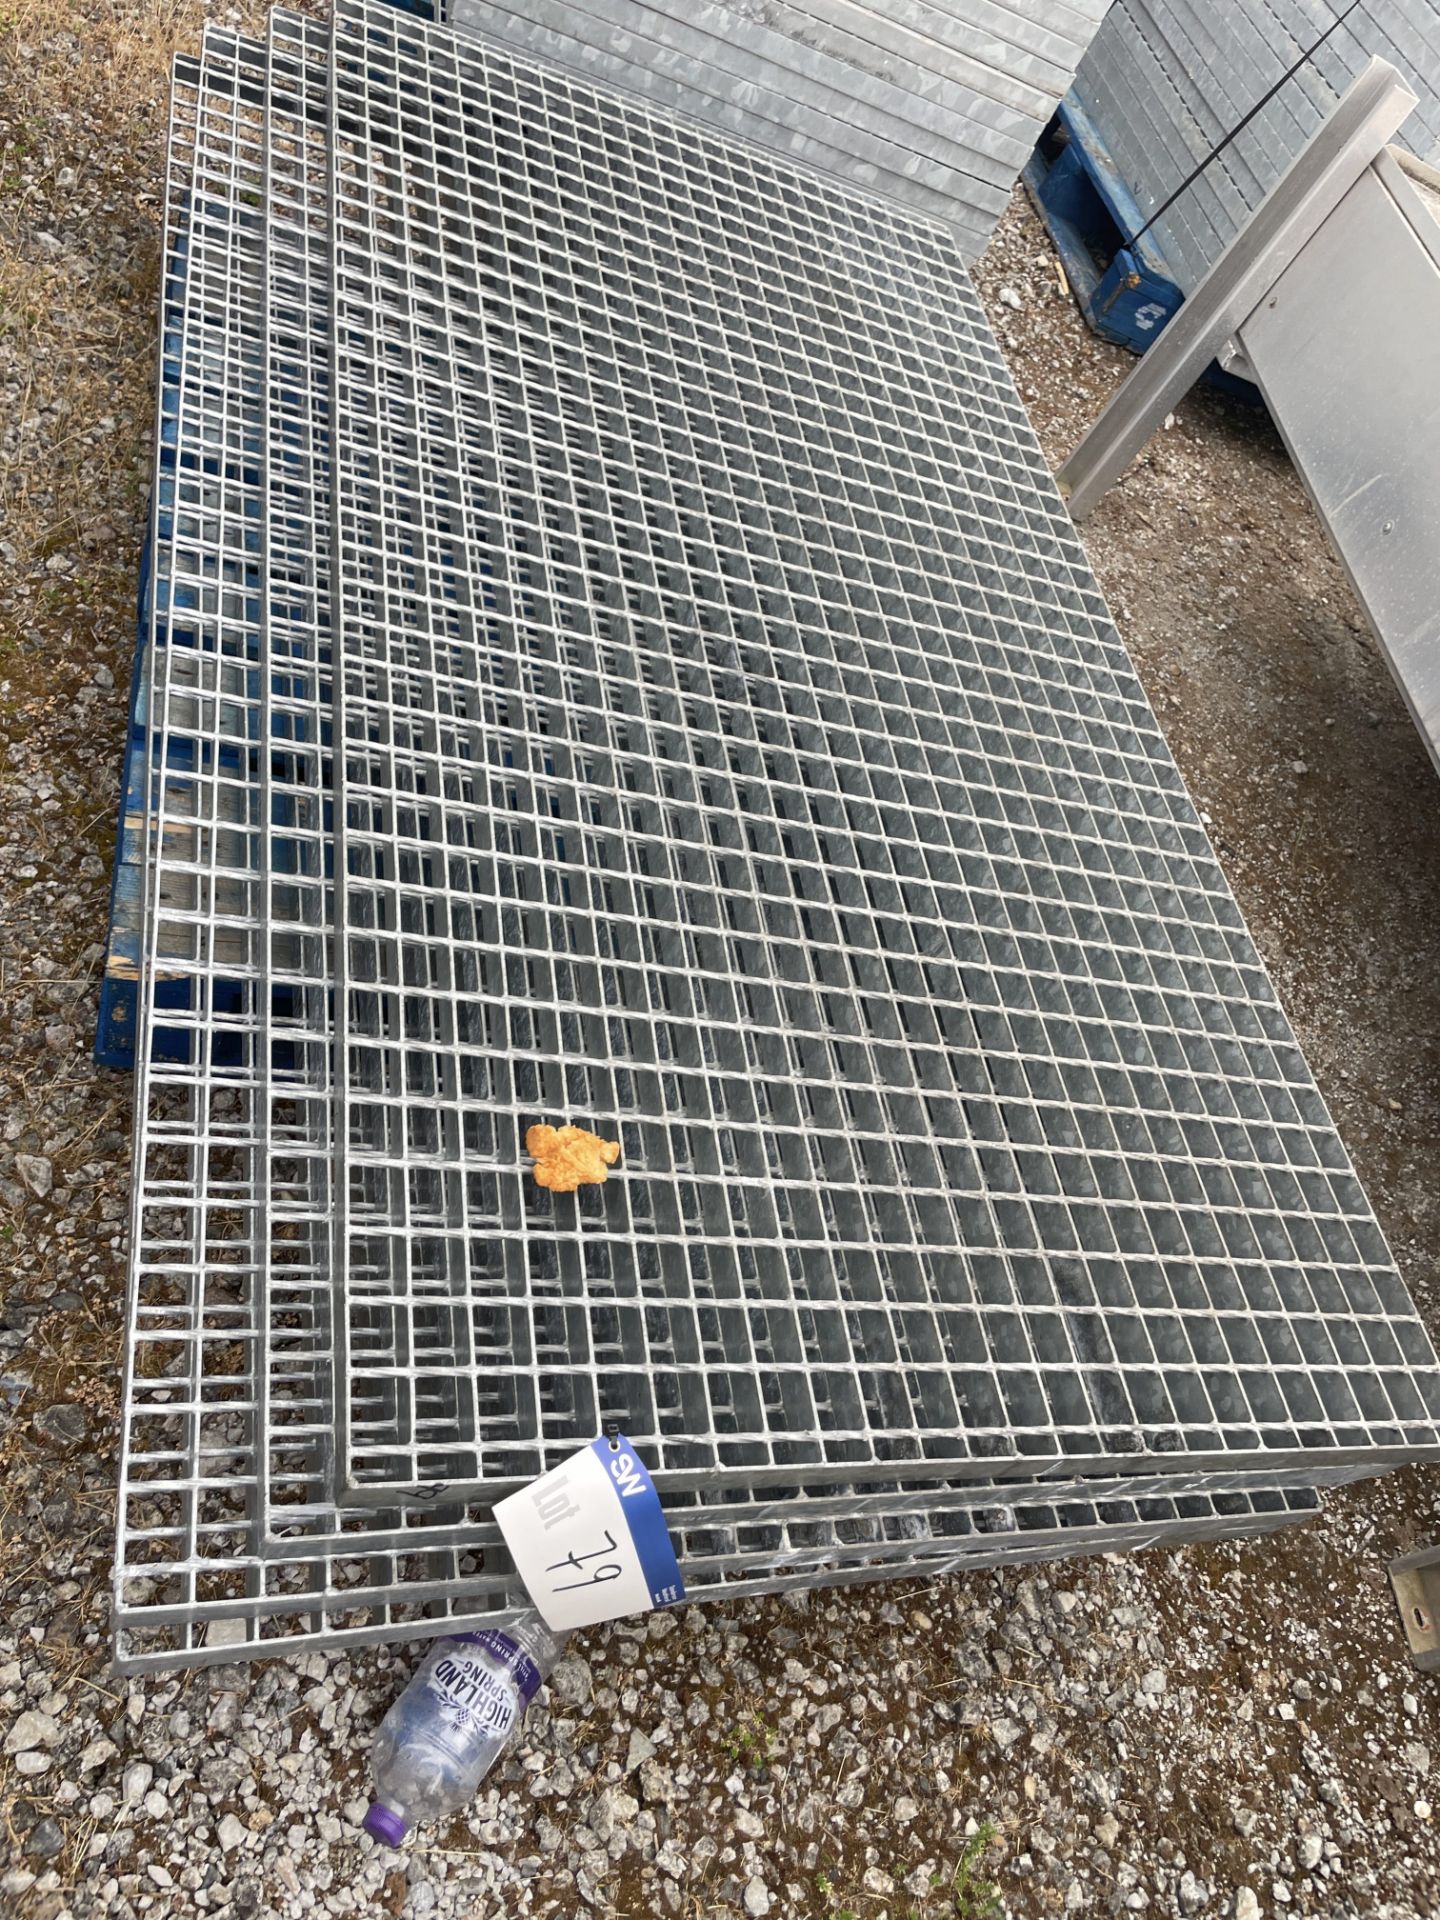 FOUR GALVANISED STEEL WALKWAY PANELS, each approx. 2m x 1m x 40mmPlease read the following important